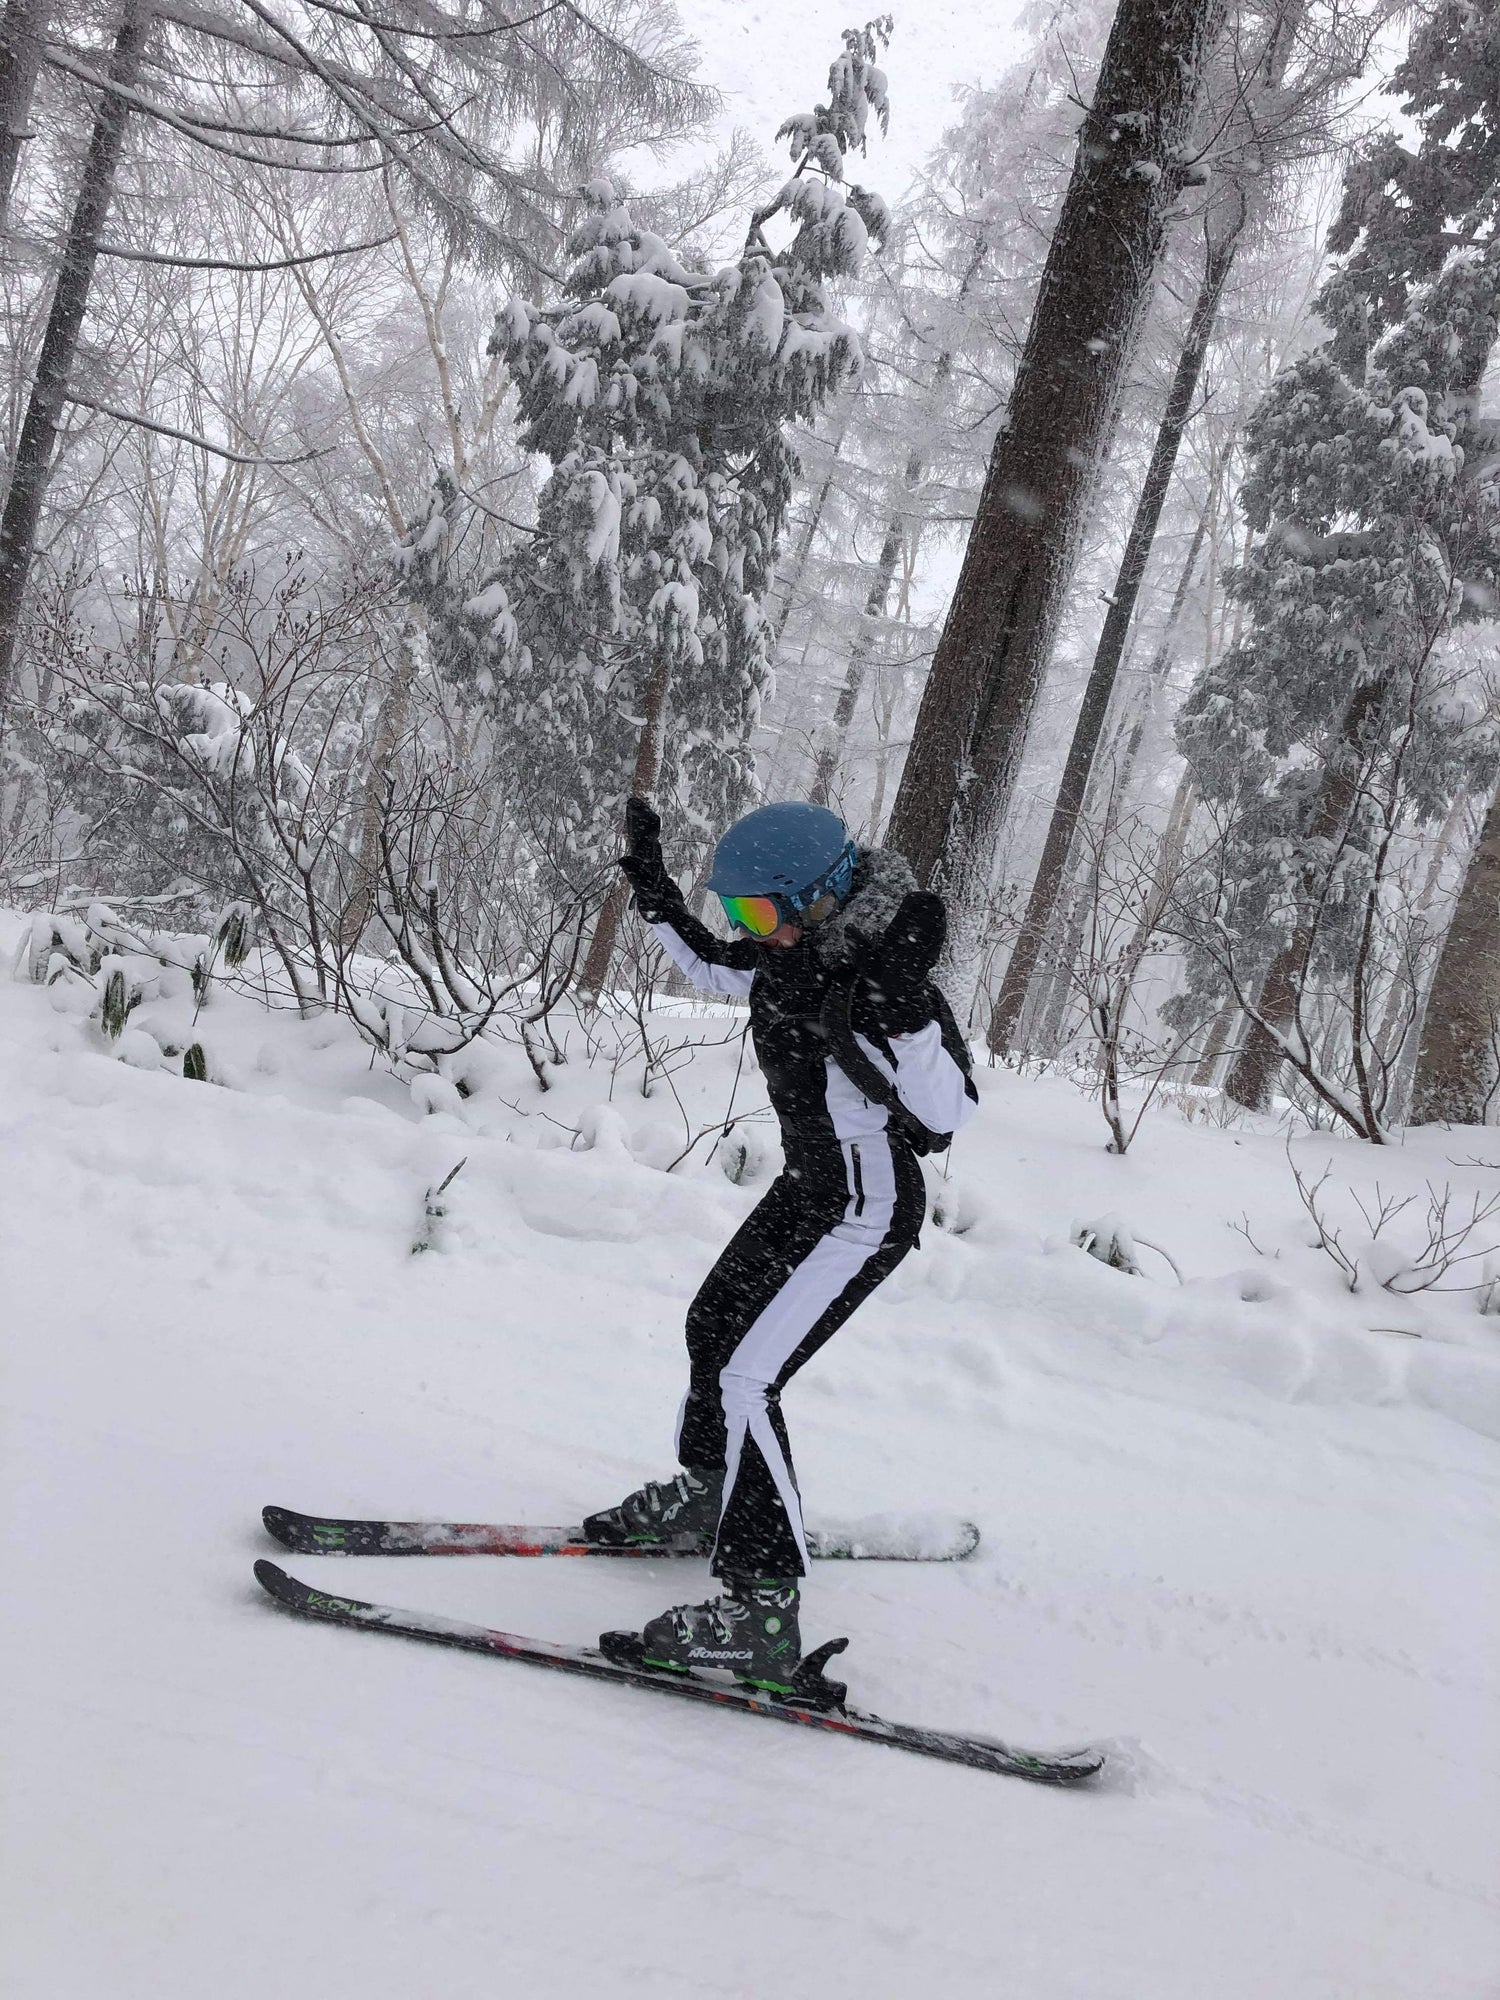 Our founder Hebe on her first skiing experience in Nozawa Onsen, Japan - BooChaCha